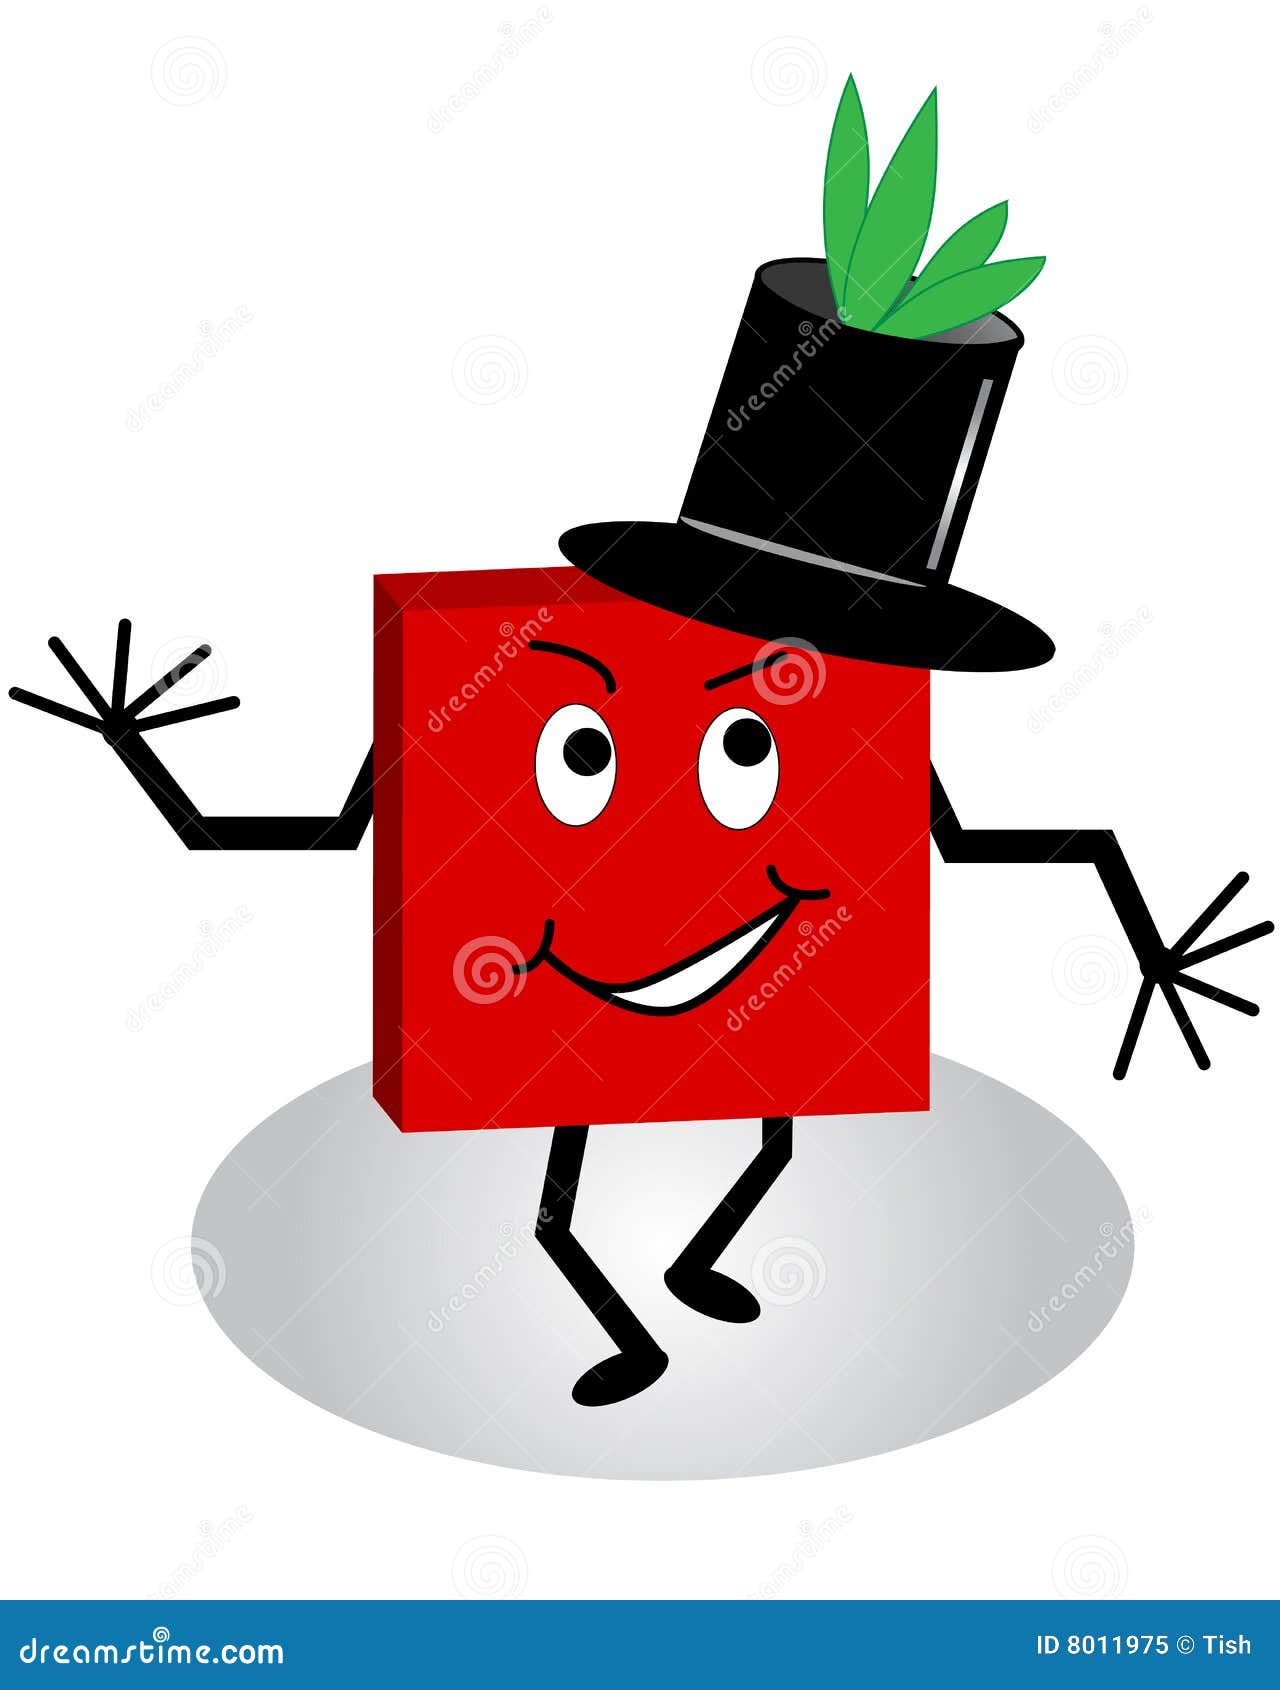 Cartoon Character Tophat Stock Illustrations 429 Cartoon Character Tophat Stock Illustrations Vectors Clipart Dreamstime